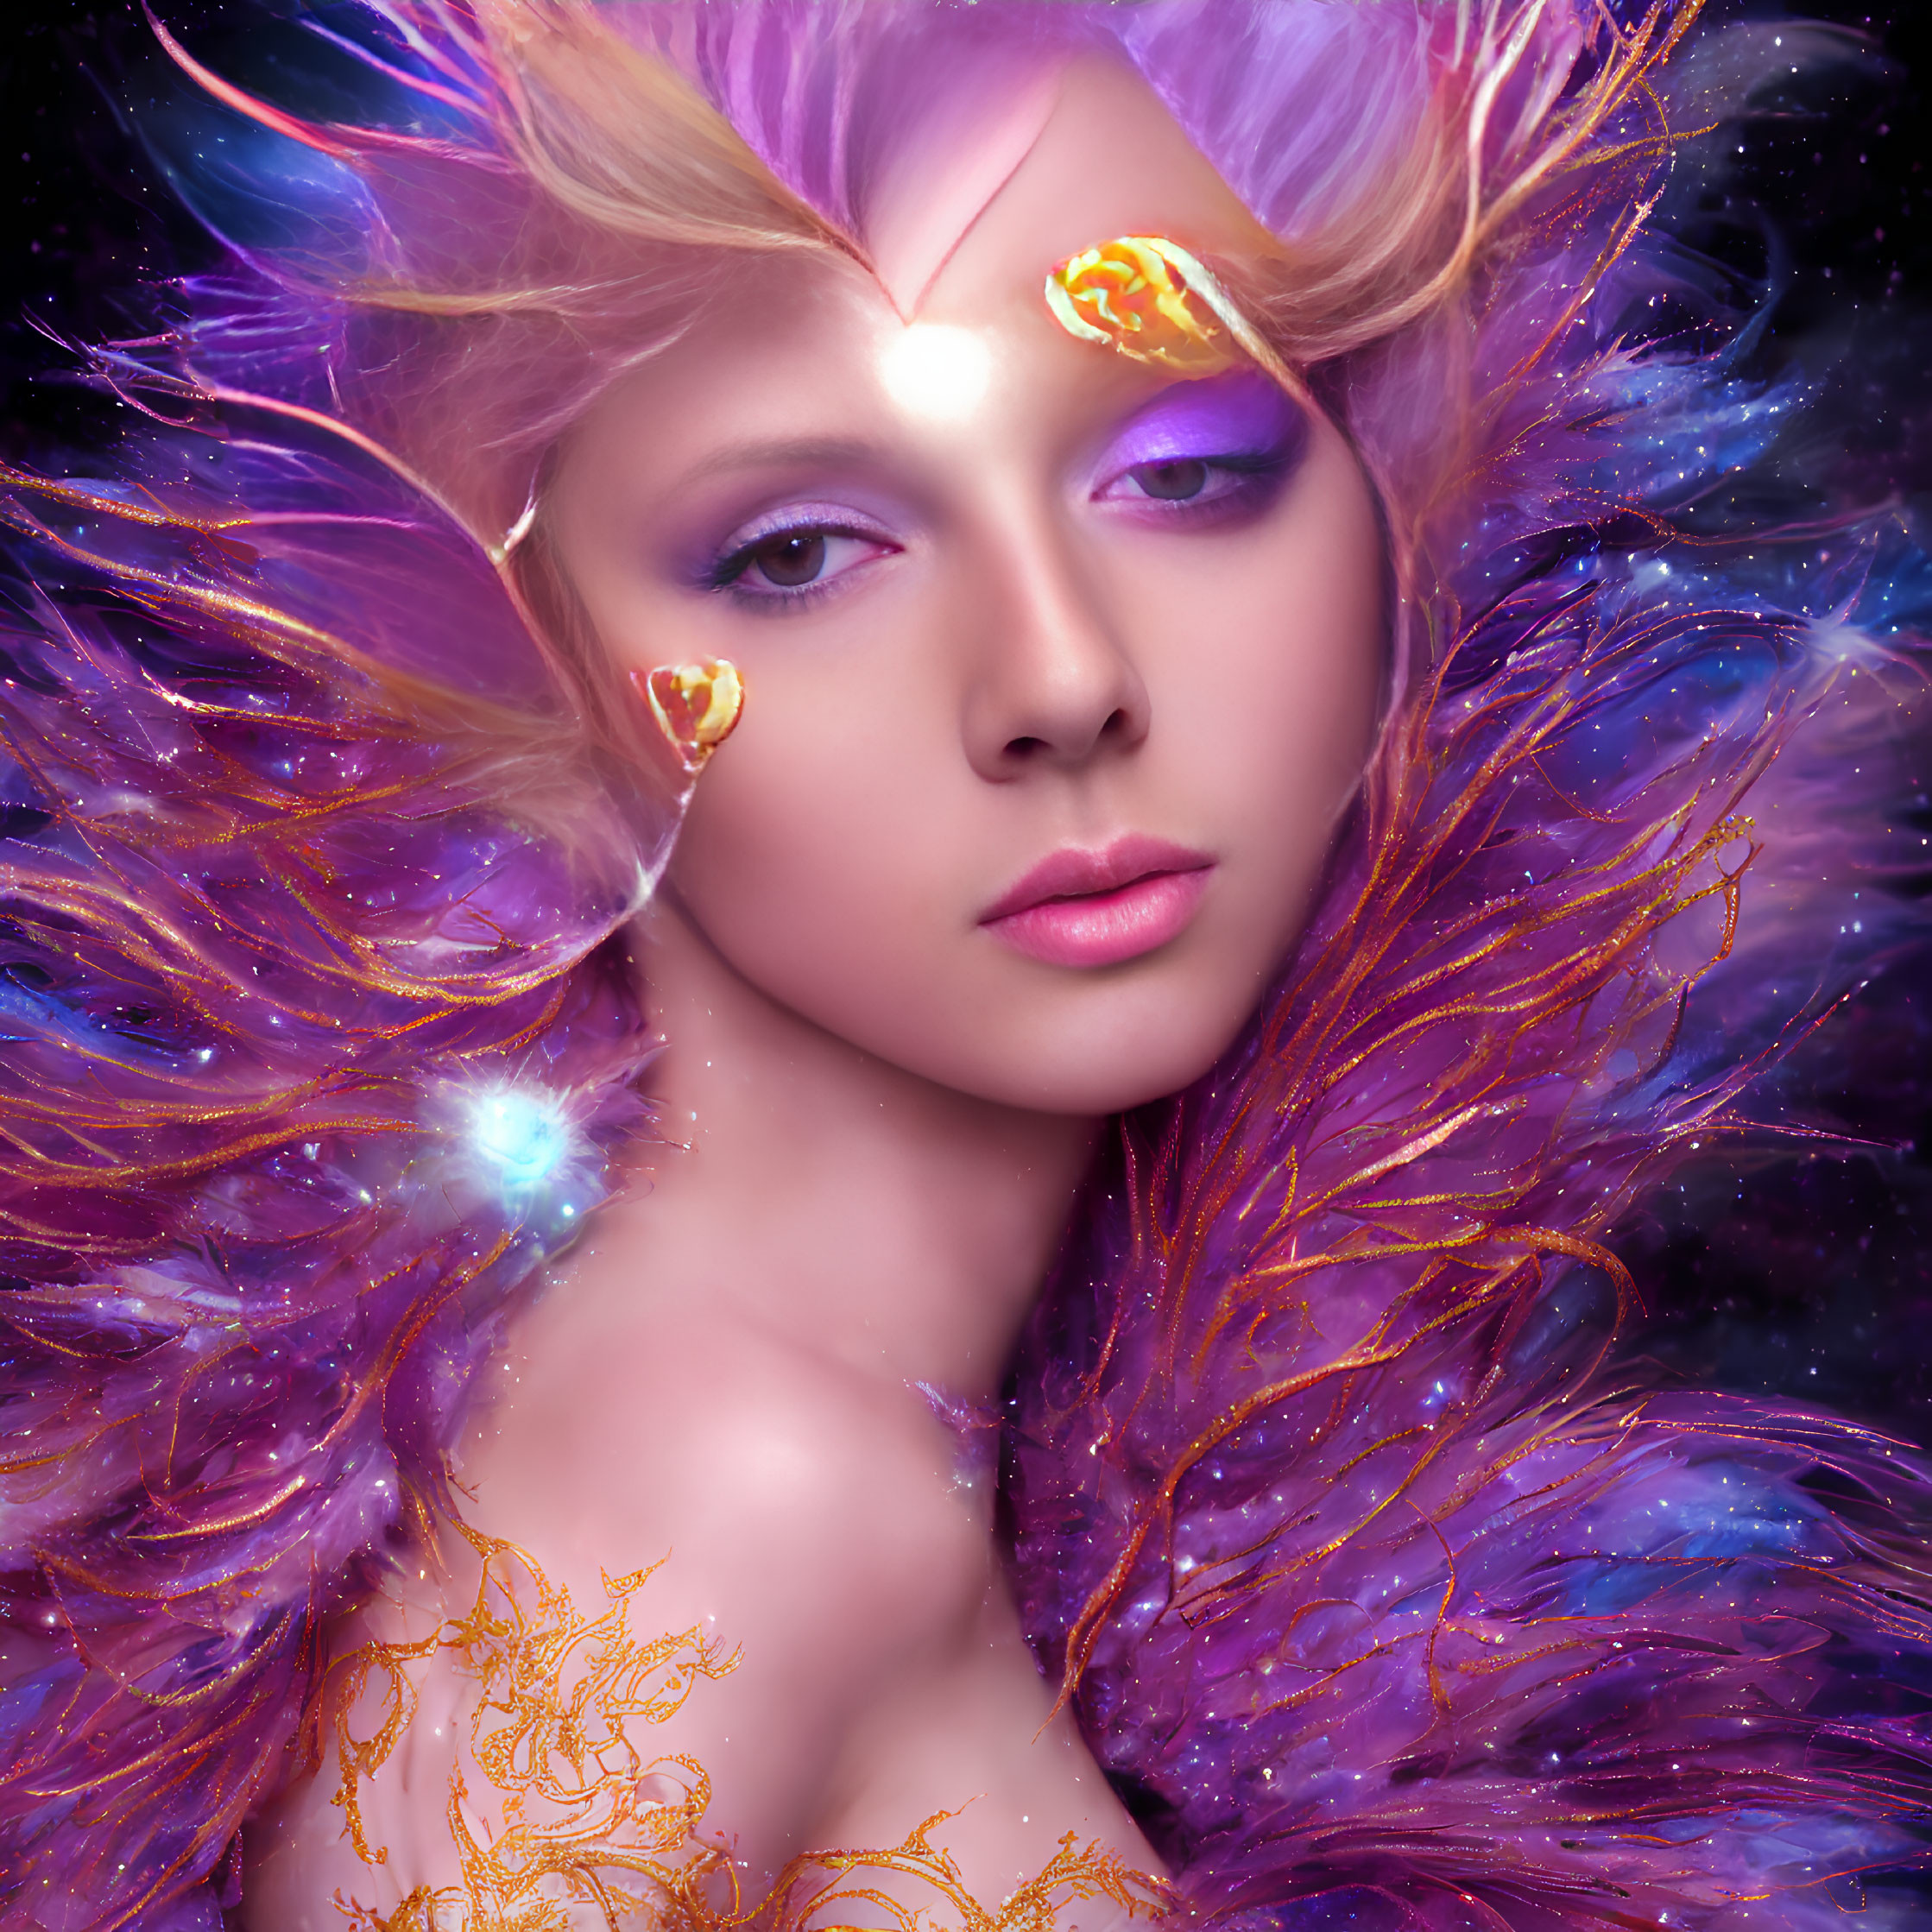 Mystical woman in purple and gold feathered attire with gem on forehead in starry scene